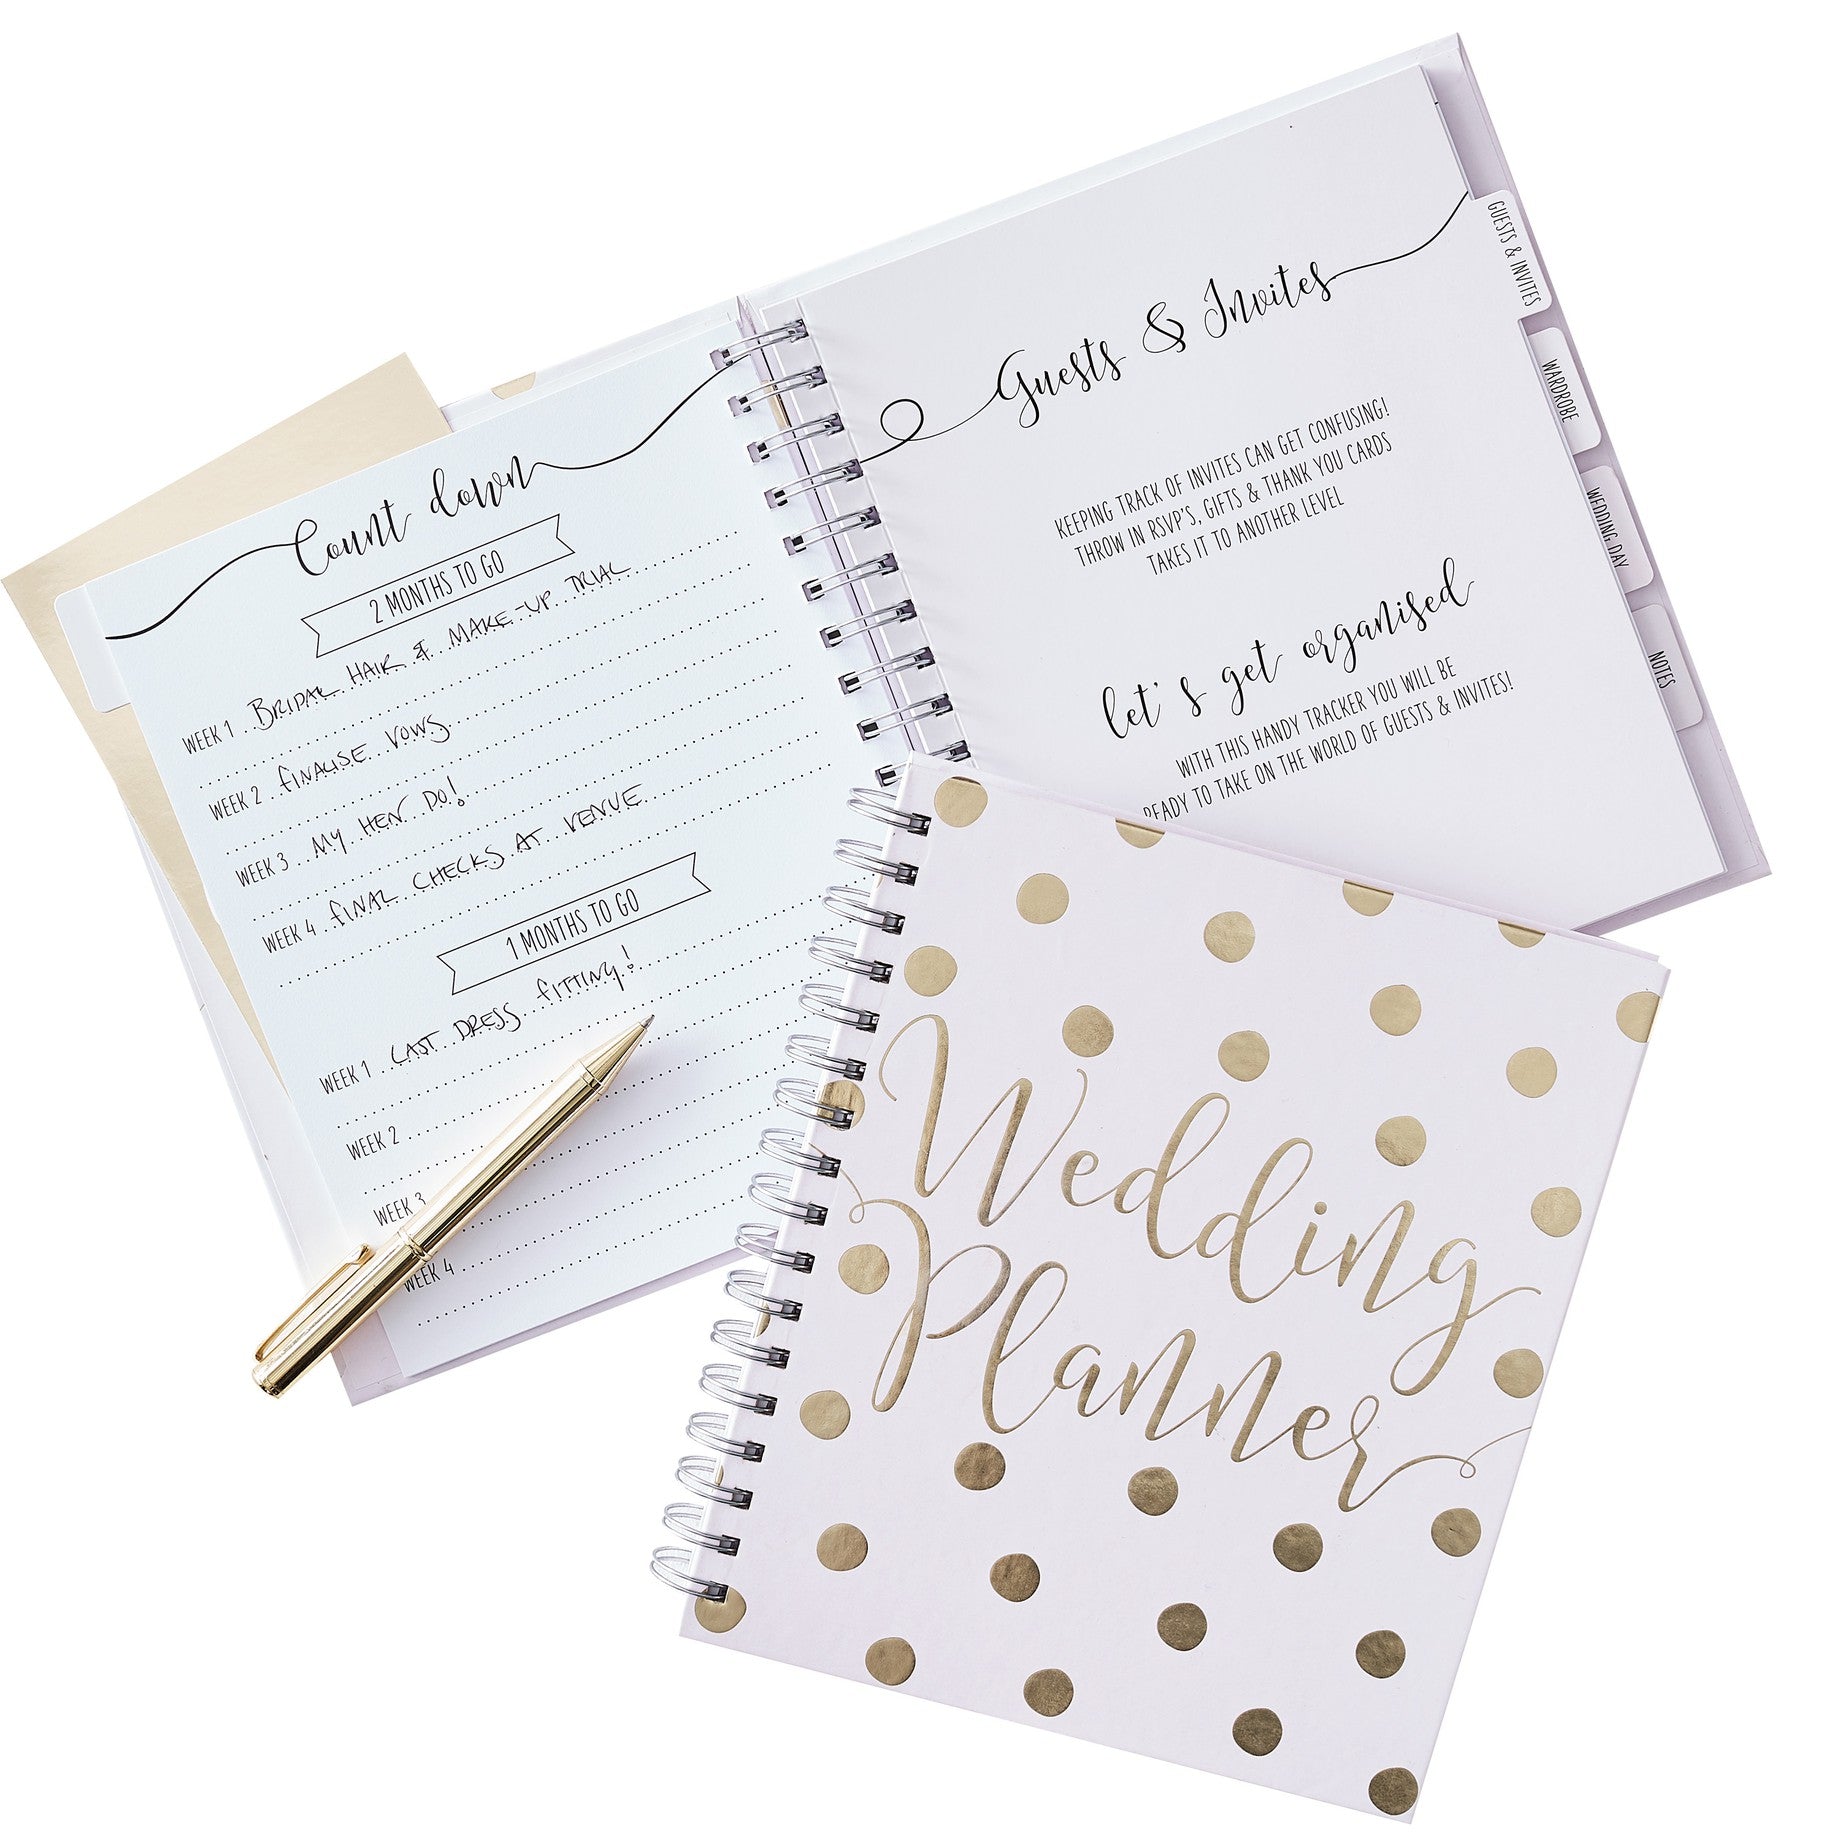 Pale pink and Gold foiled polka dot spiral bound wedding planner book, containing different sections for guest lists, budgets etc. all separated by dividers